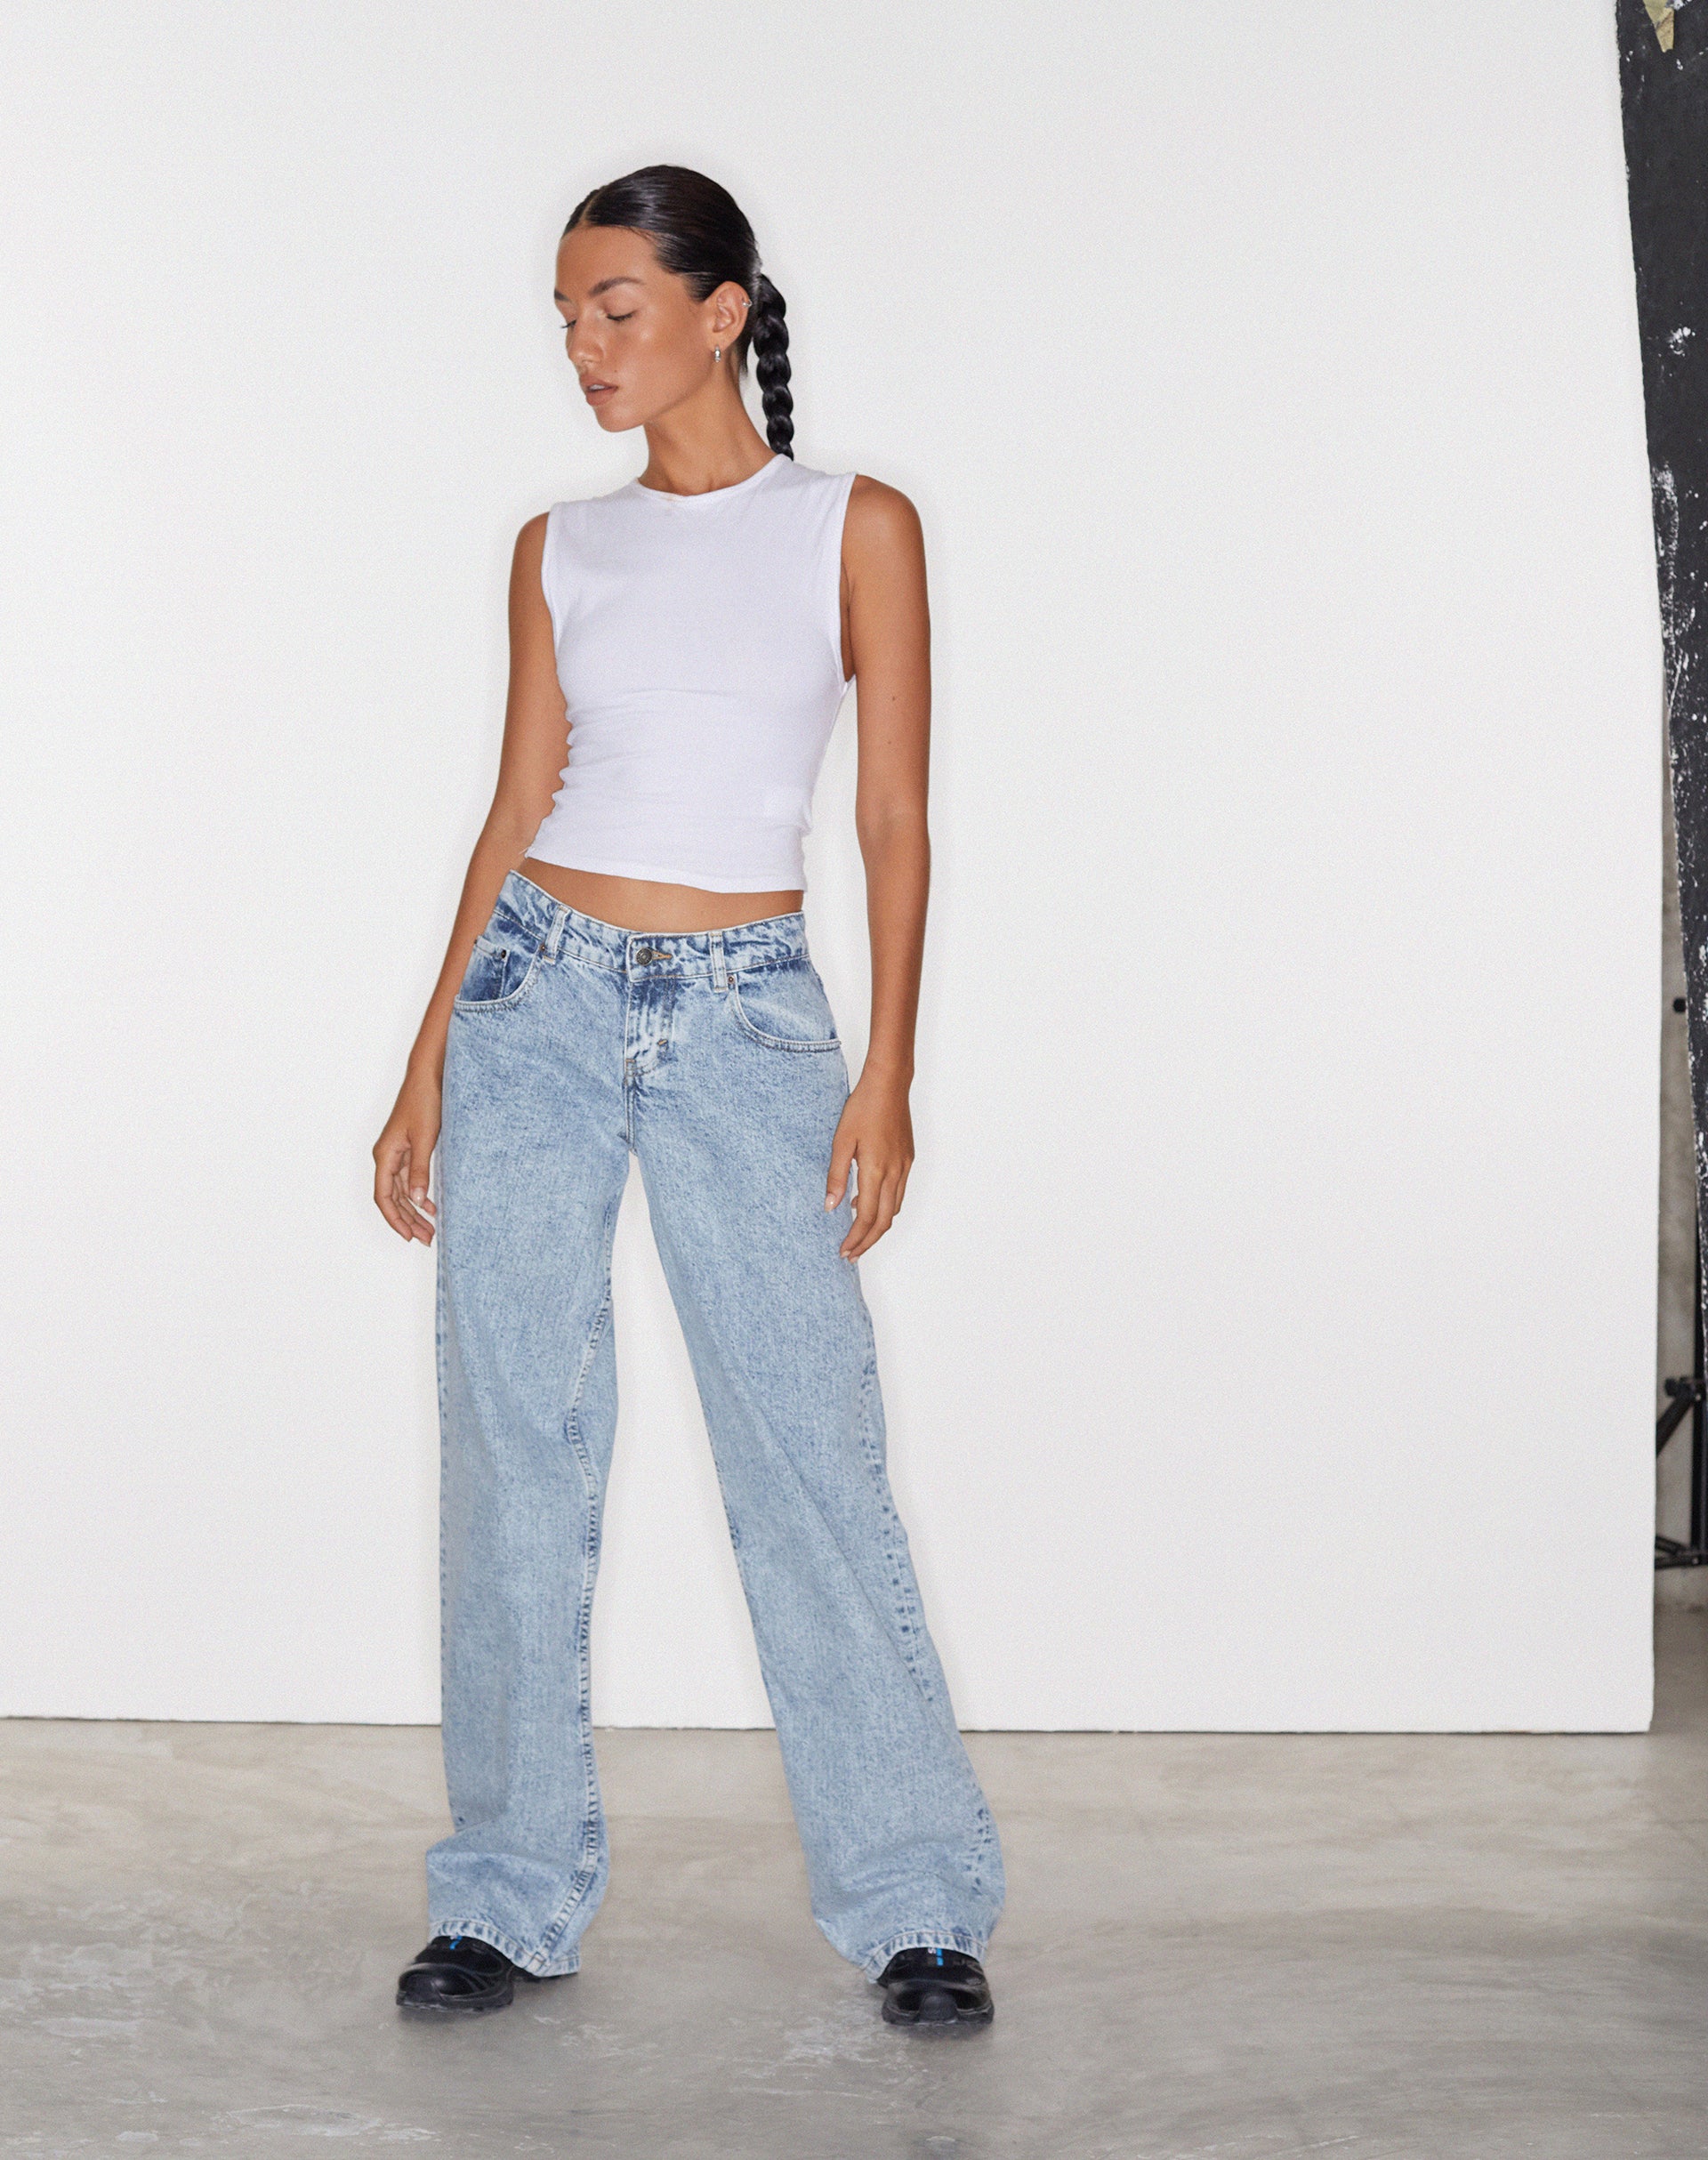 Image of Low Rise Parallel Jeans in 80s Light Blue Wash